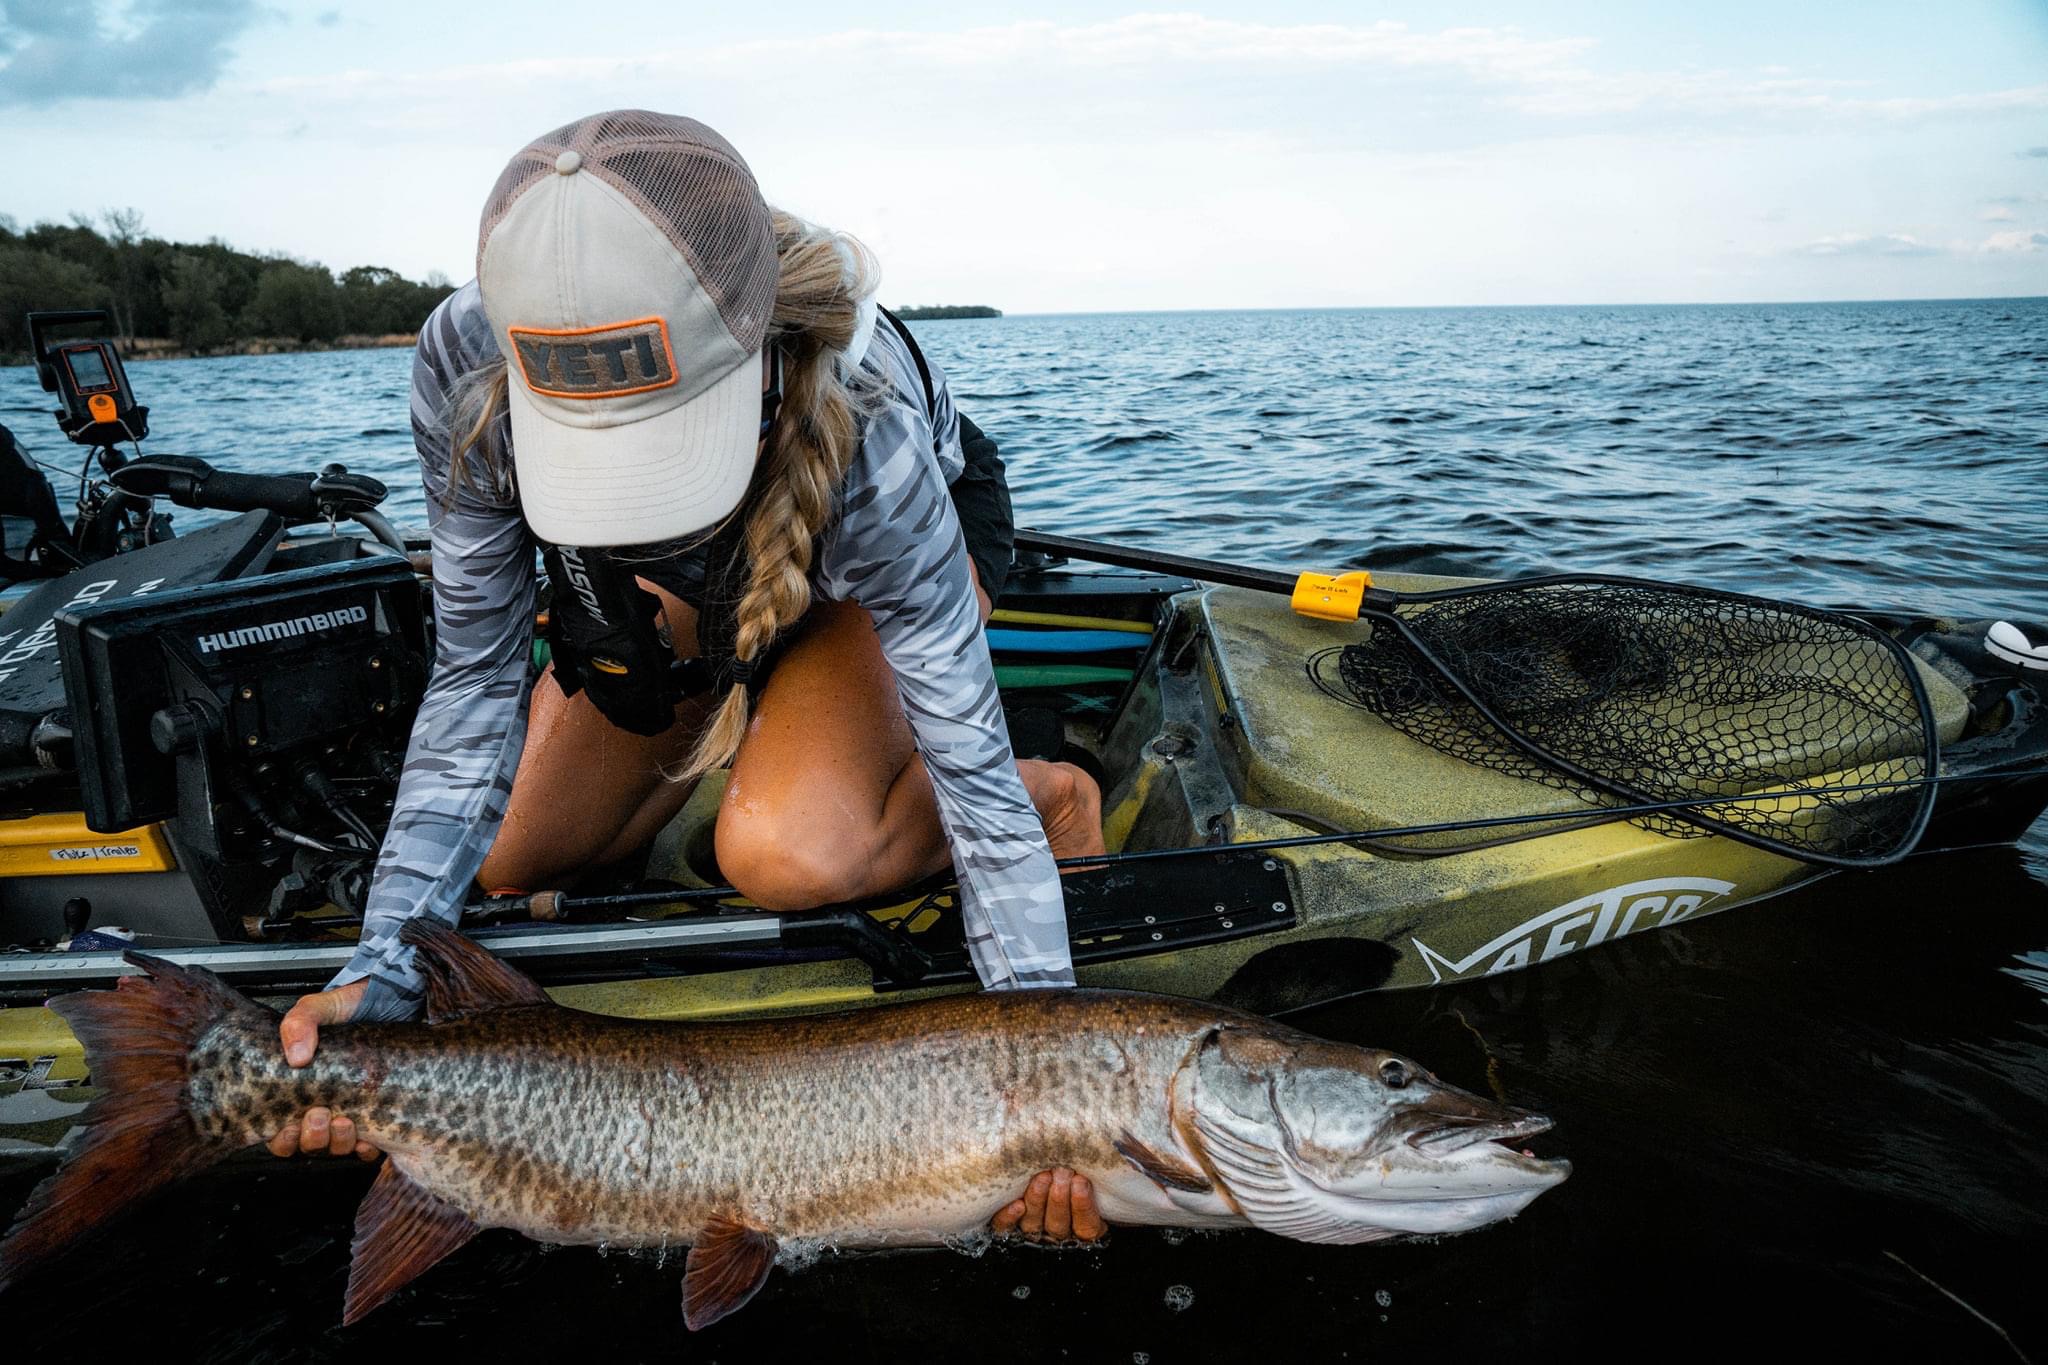 Change up your baits to catch more muskie.